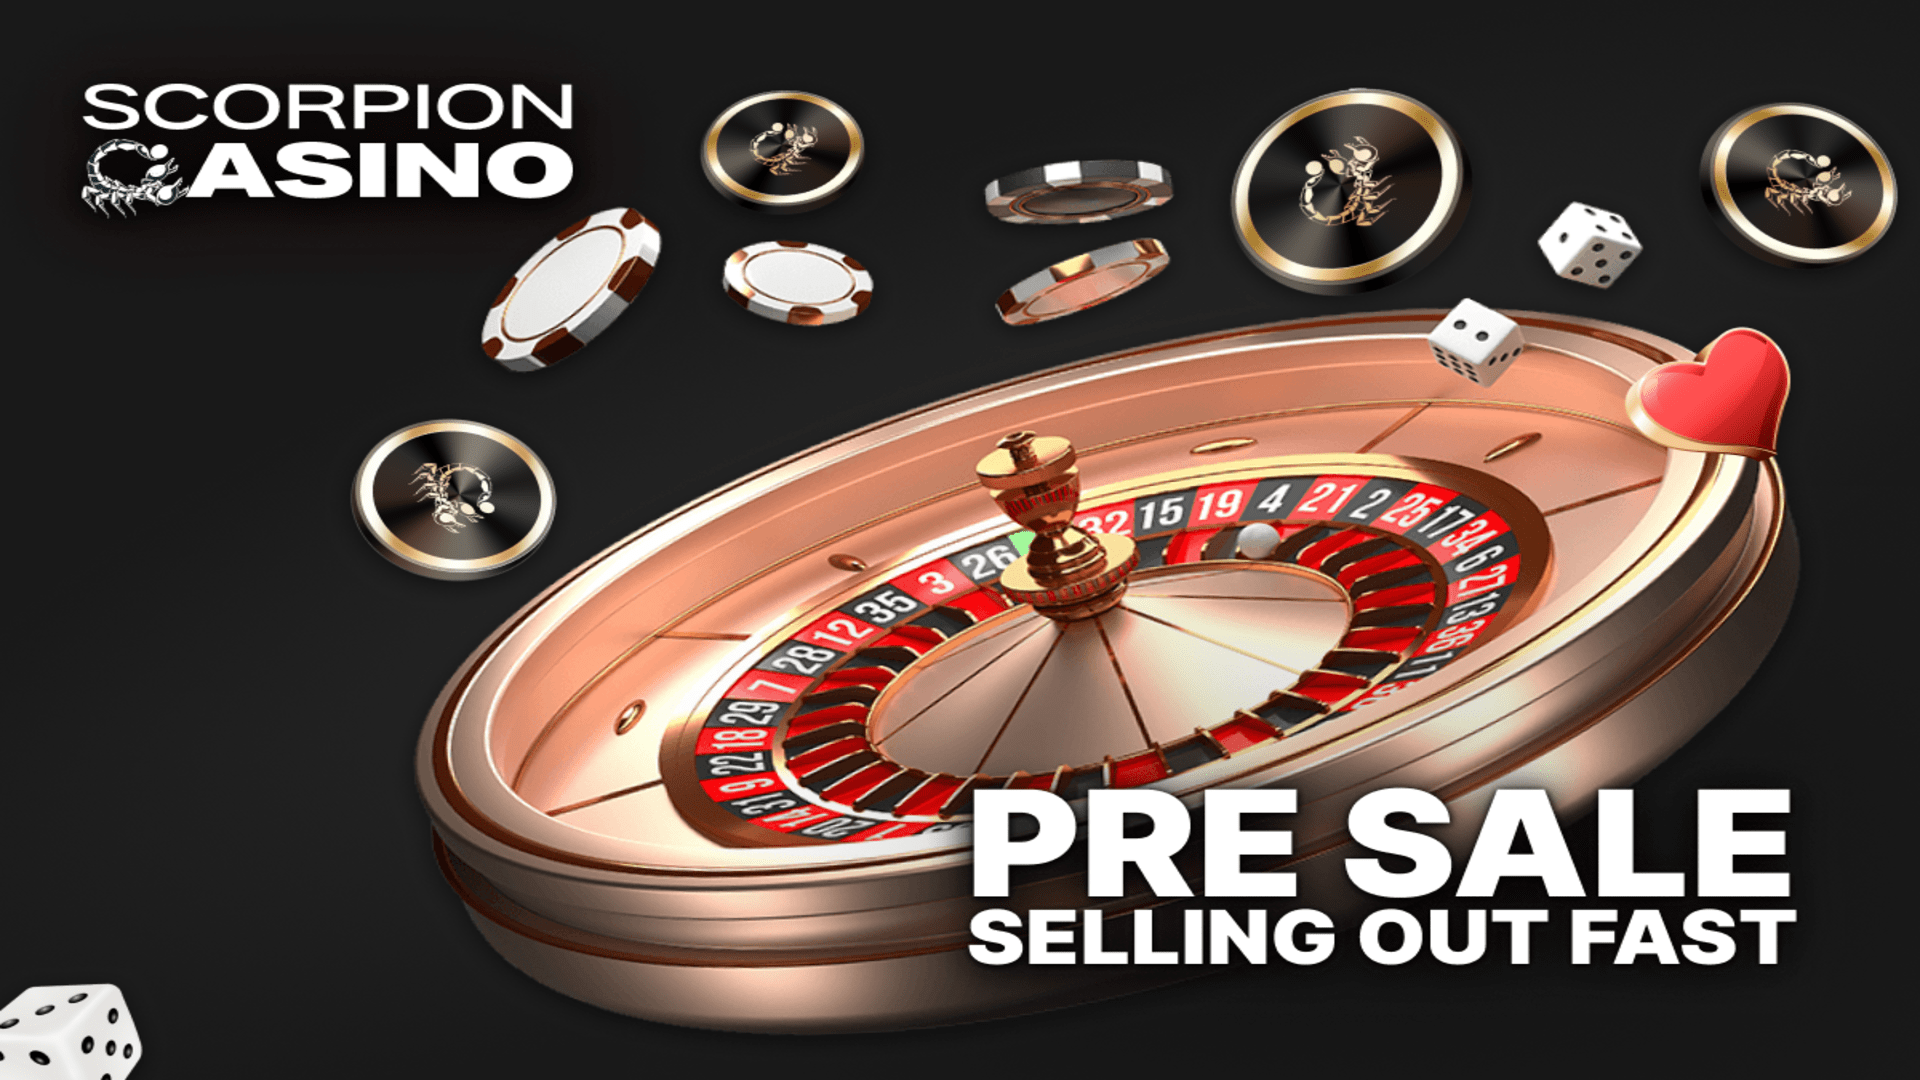 Must-Watch Crypto, Scorpion Casino, Soars in Presale, Outshining Solana and BCH